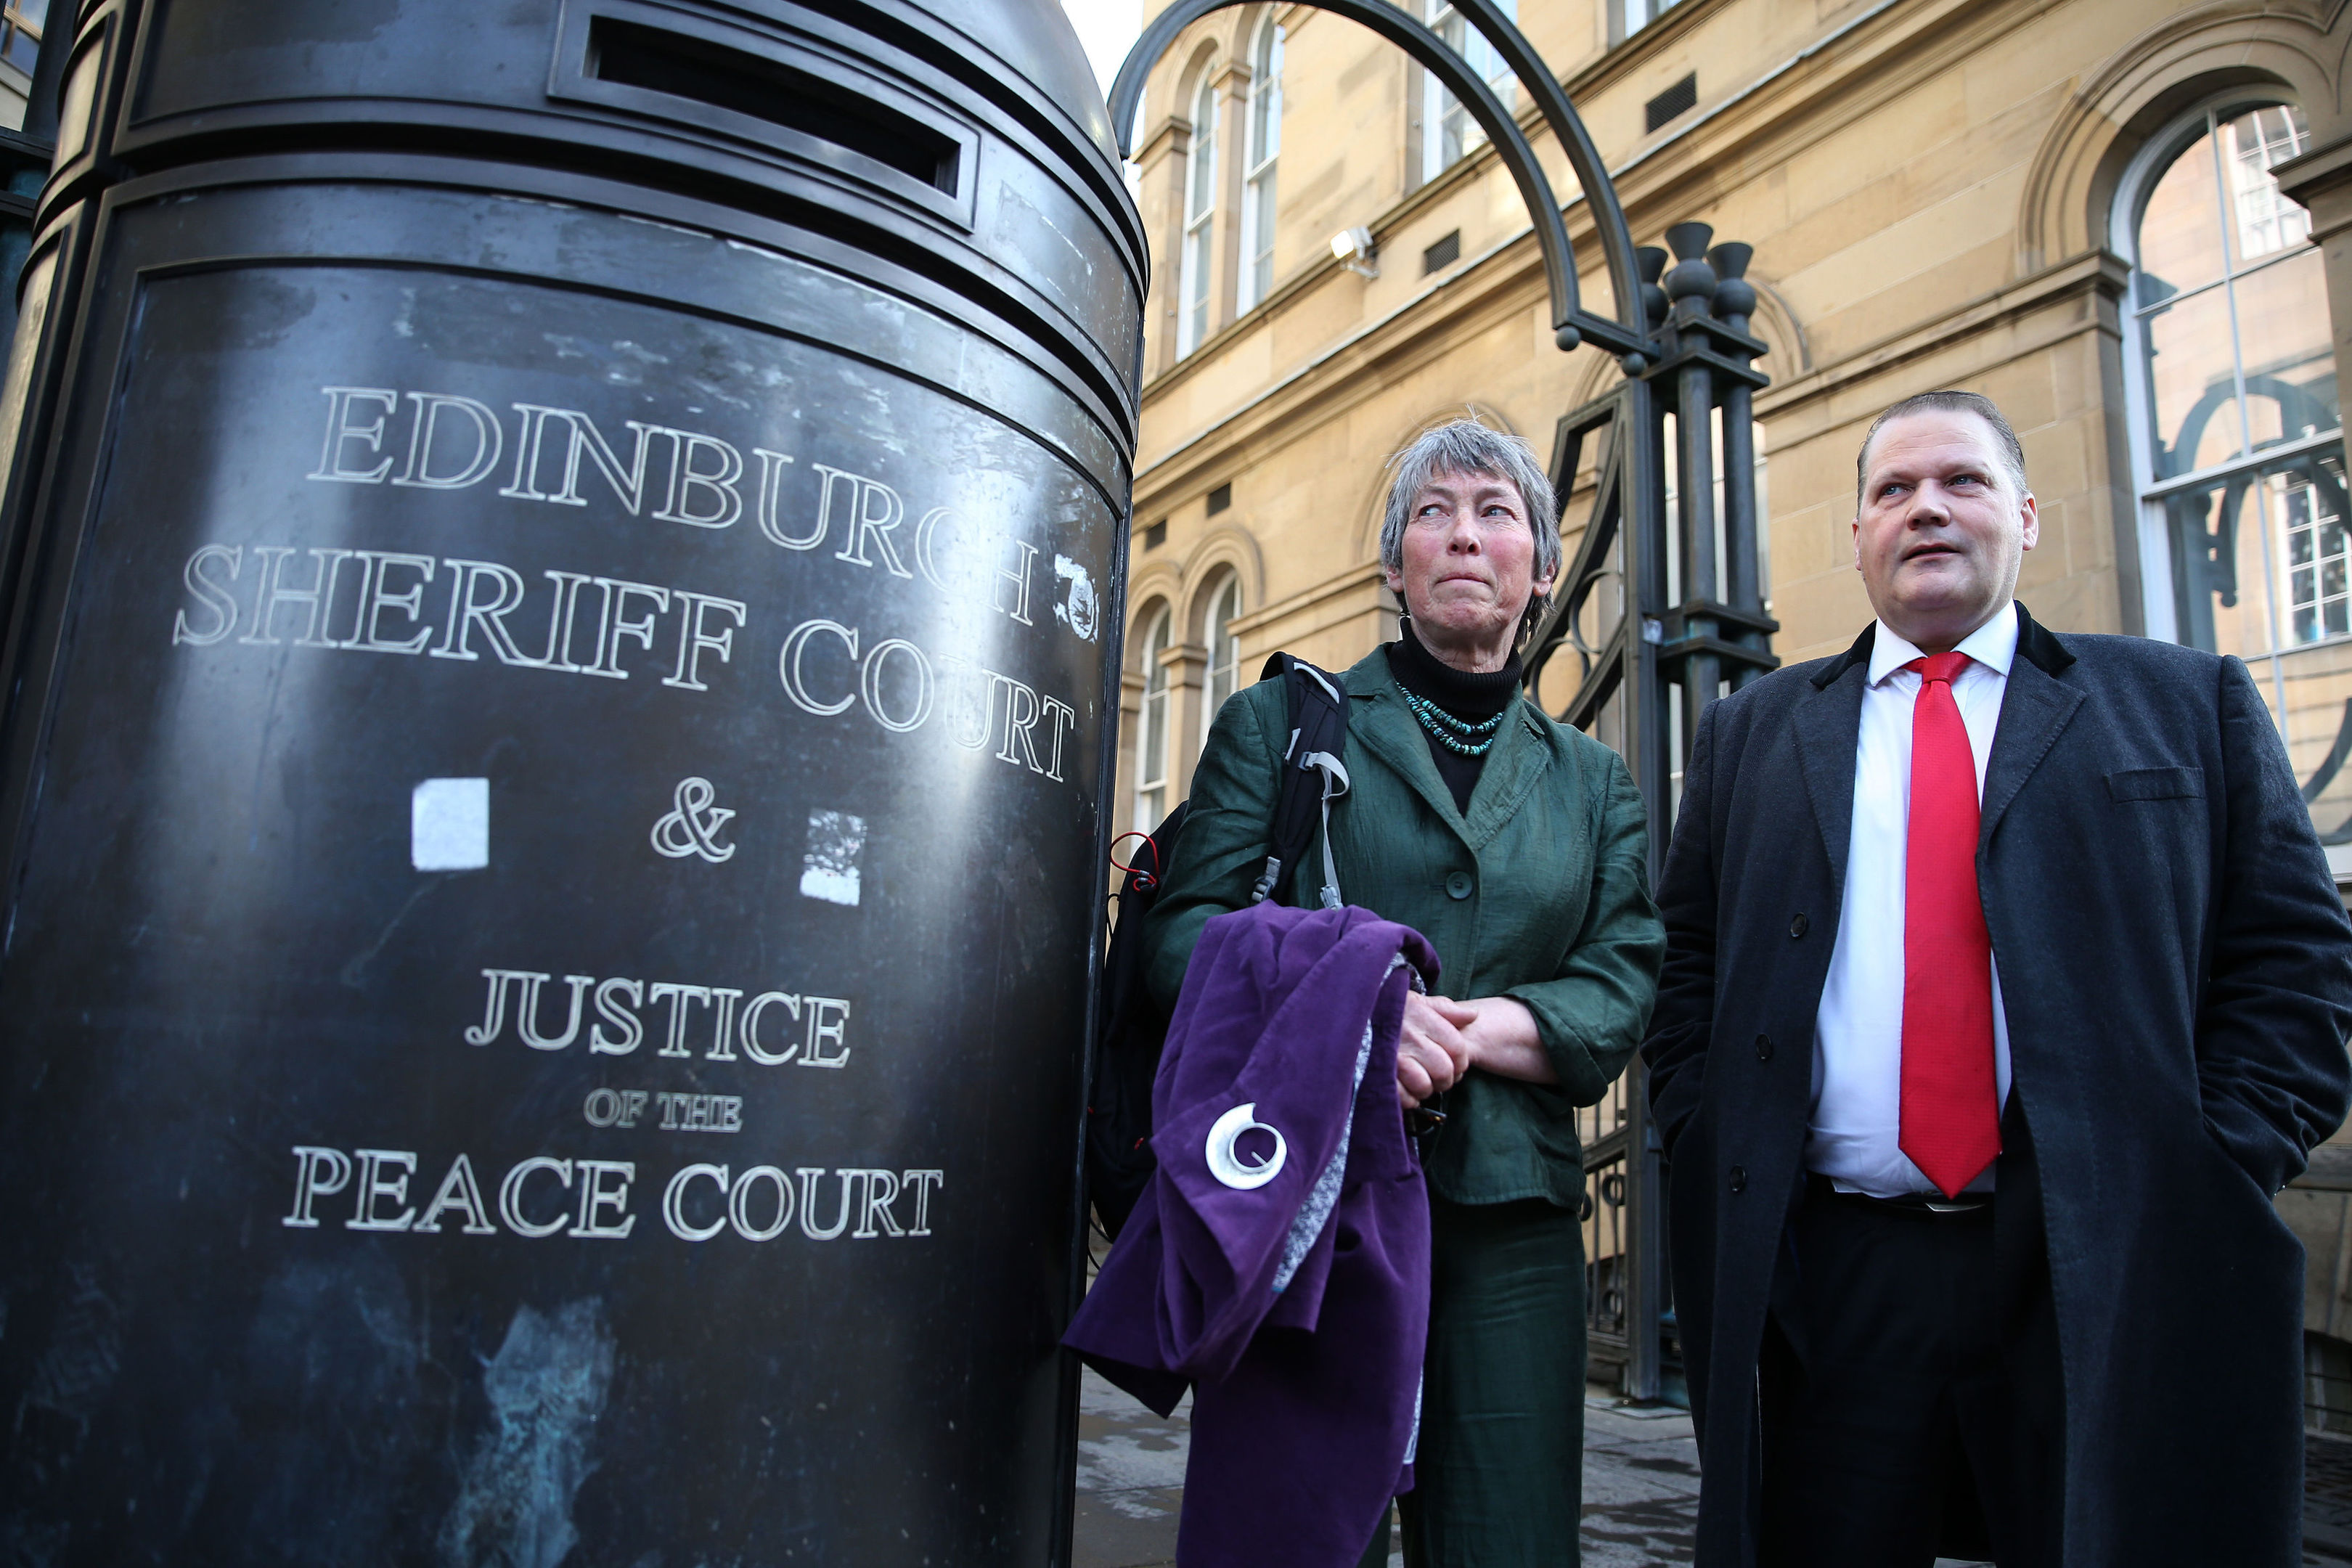 Carol Rohan Beyts, with her lawyer lawyer Mike Dailly outside Edinburgh Sheriff Court, who has been permitted to pursue damages against Donald Trump's Aberdeenshire golf course over allegations that staff filmed her urinating. (Andrew Milligan/PA Wire)